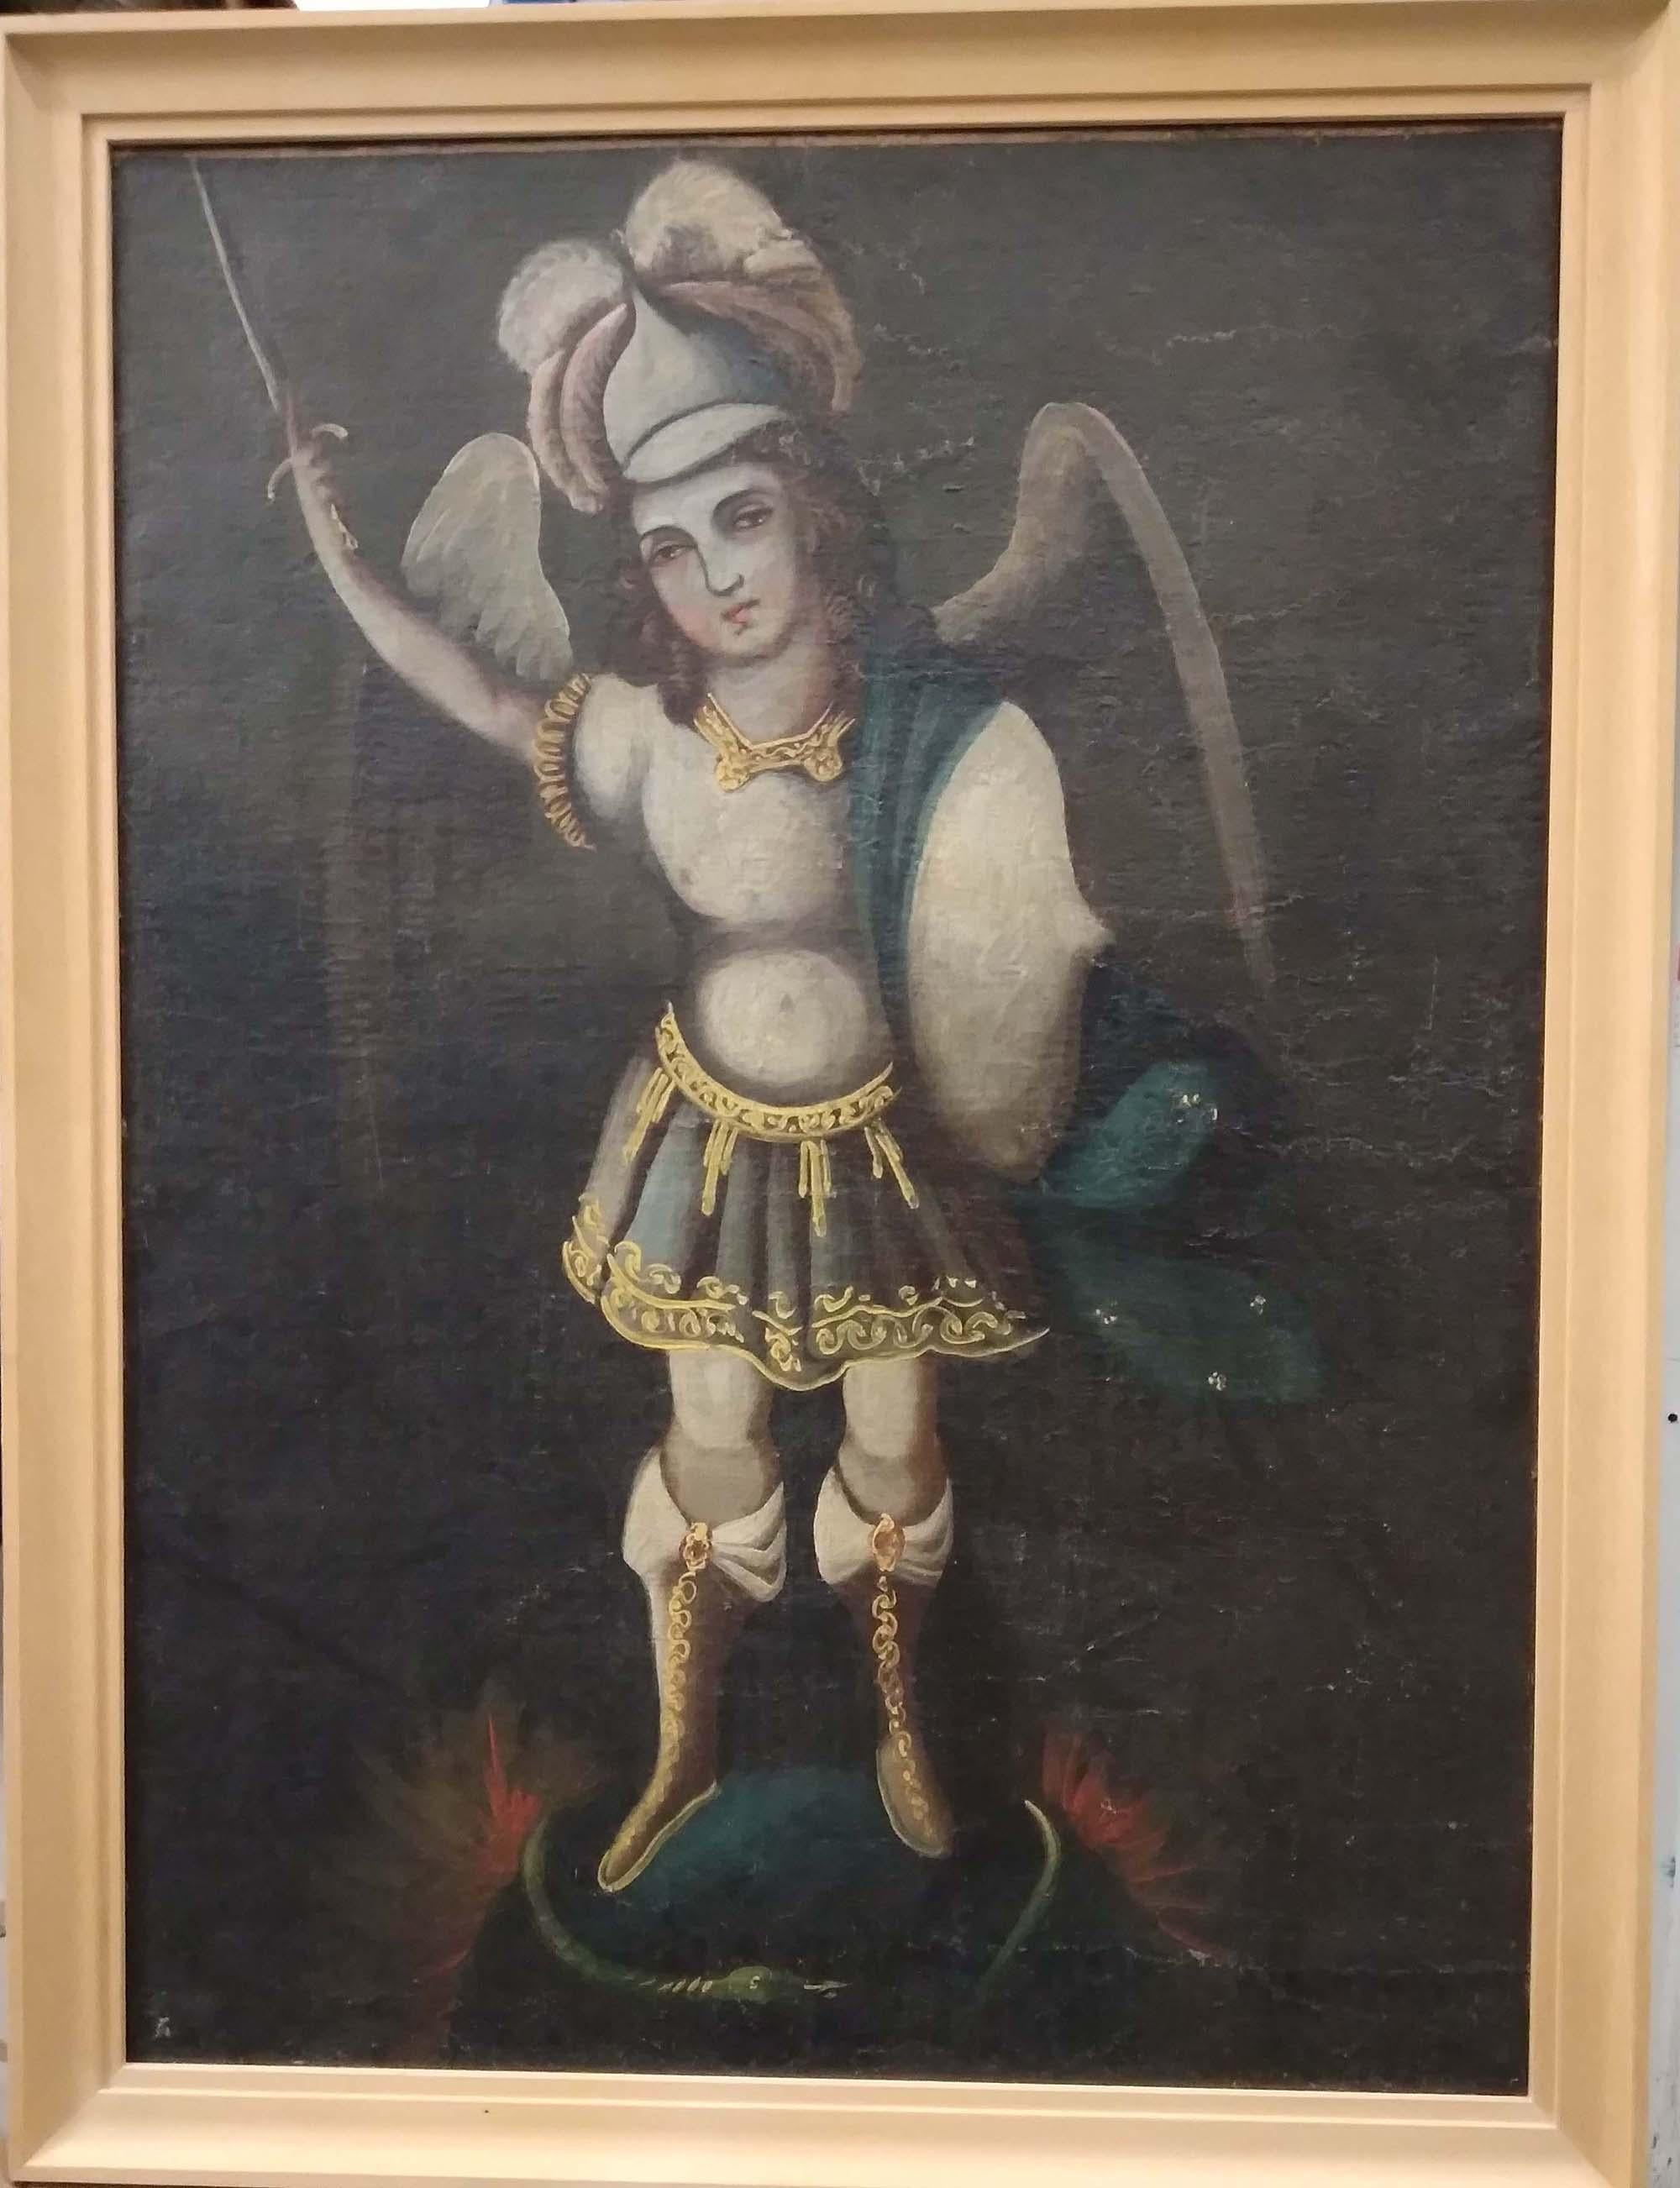 A fine 19th century full length portrait of St Michael standing with his sword raised.
South American Cuzco school 19th century and earlier.
Unsigned
Oil on canvas, 56 by 78cms. Framed overall size 66 x 84 approx.
Condition Old Canvas relined on